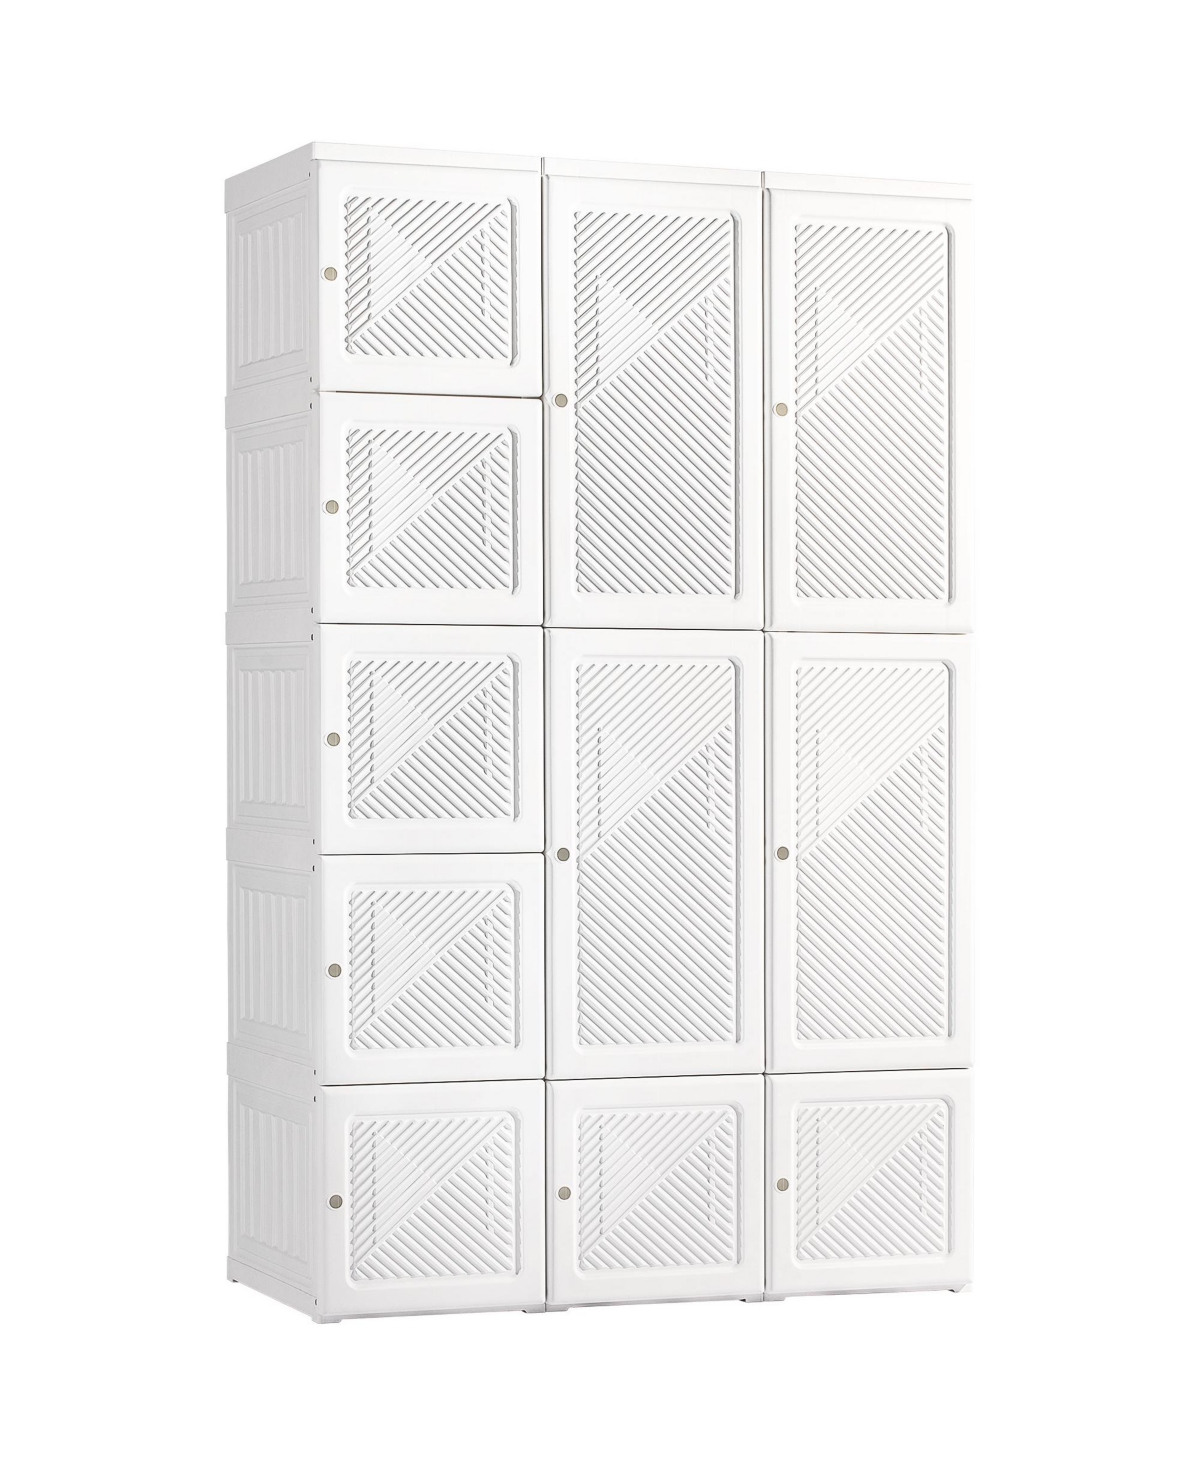 Portable Wardrobe Closet, Bedroom Armoire, Foldable Clothes Organizer with Cube Storage, Hanging Rods, and Magnet Doors, White - White